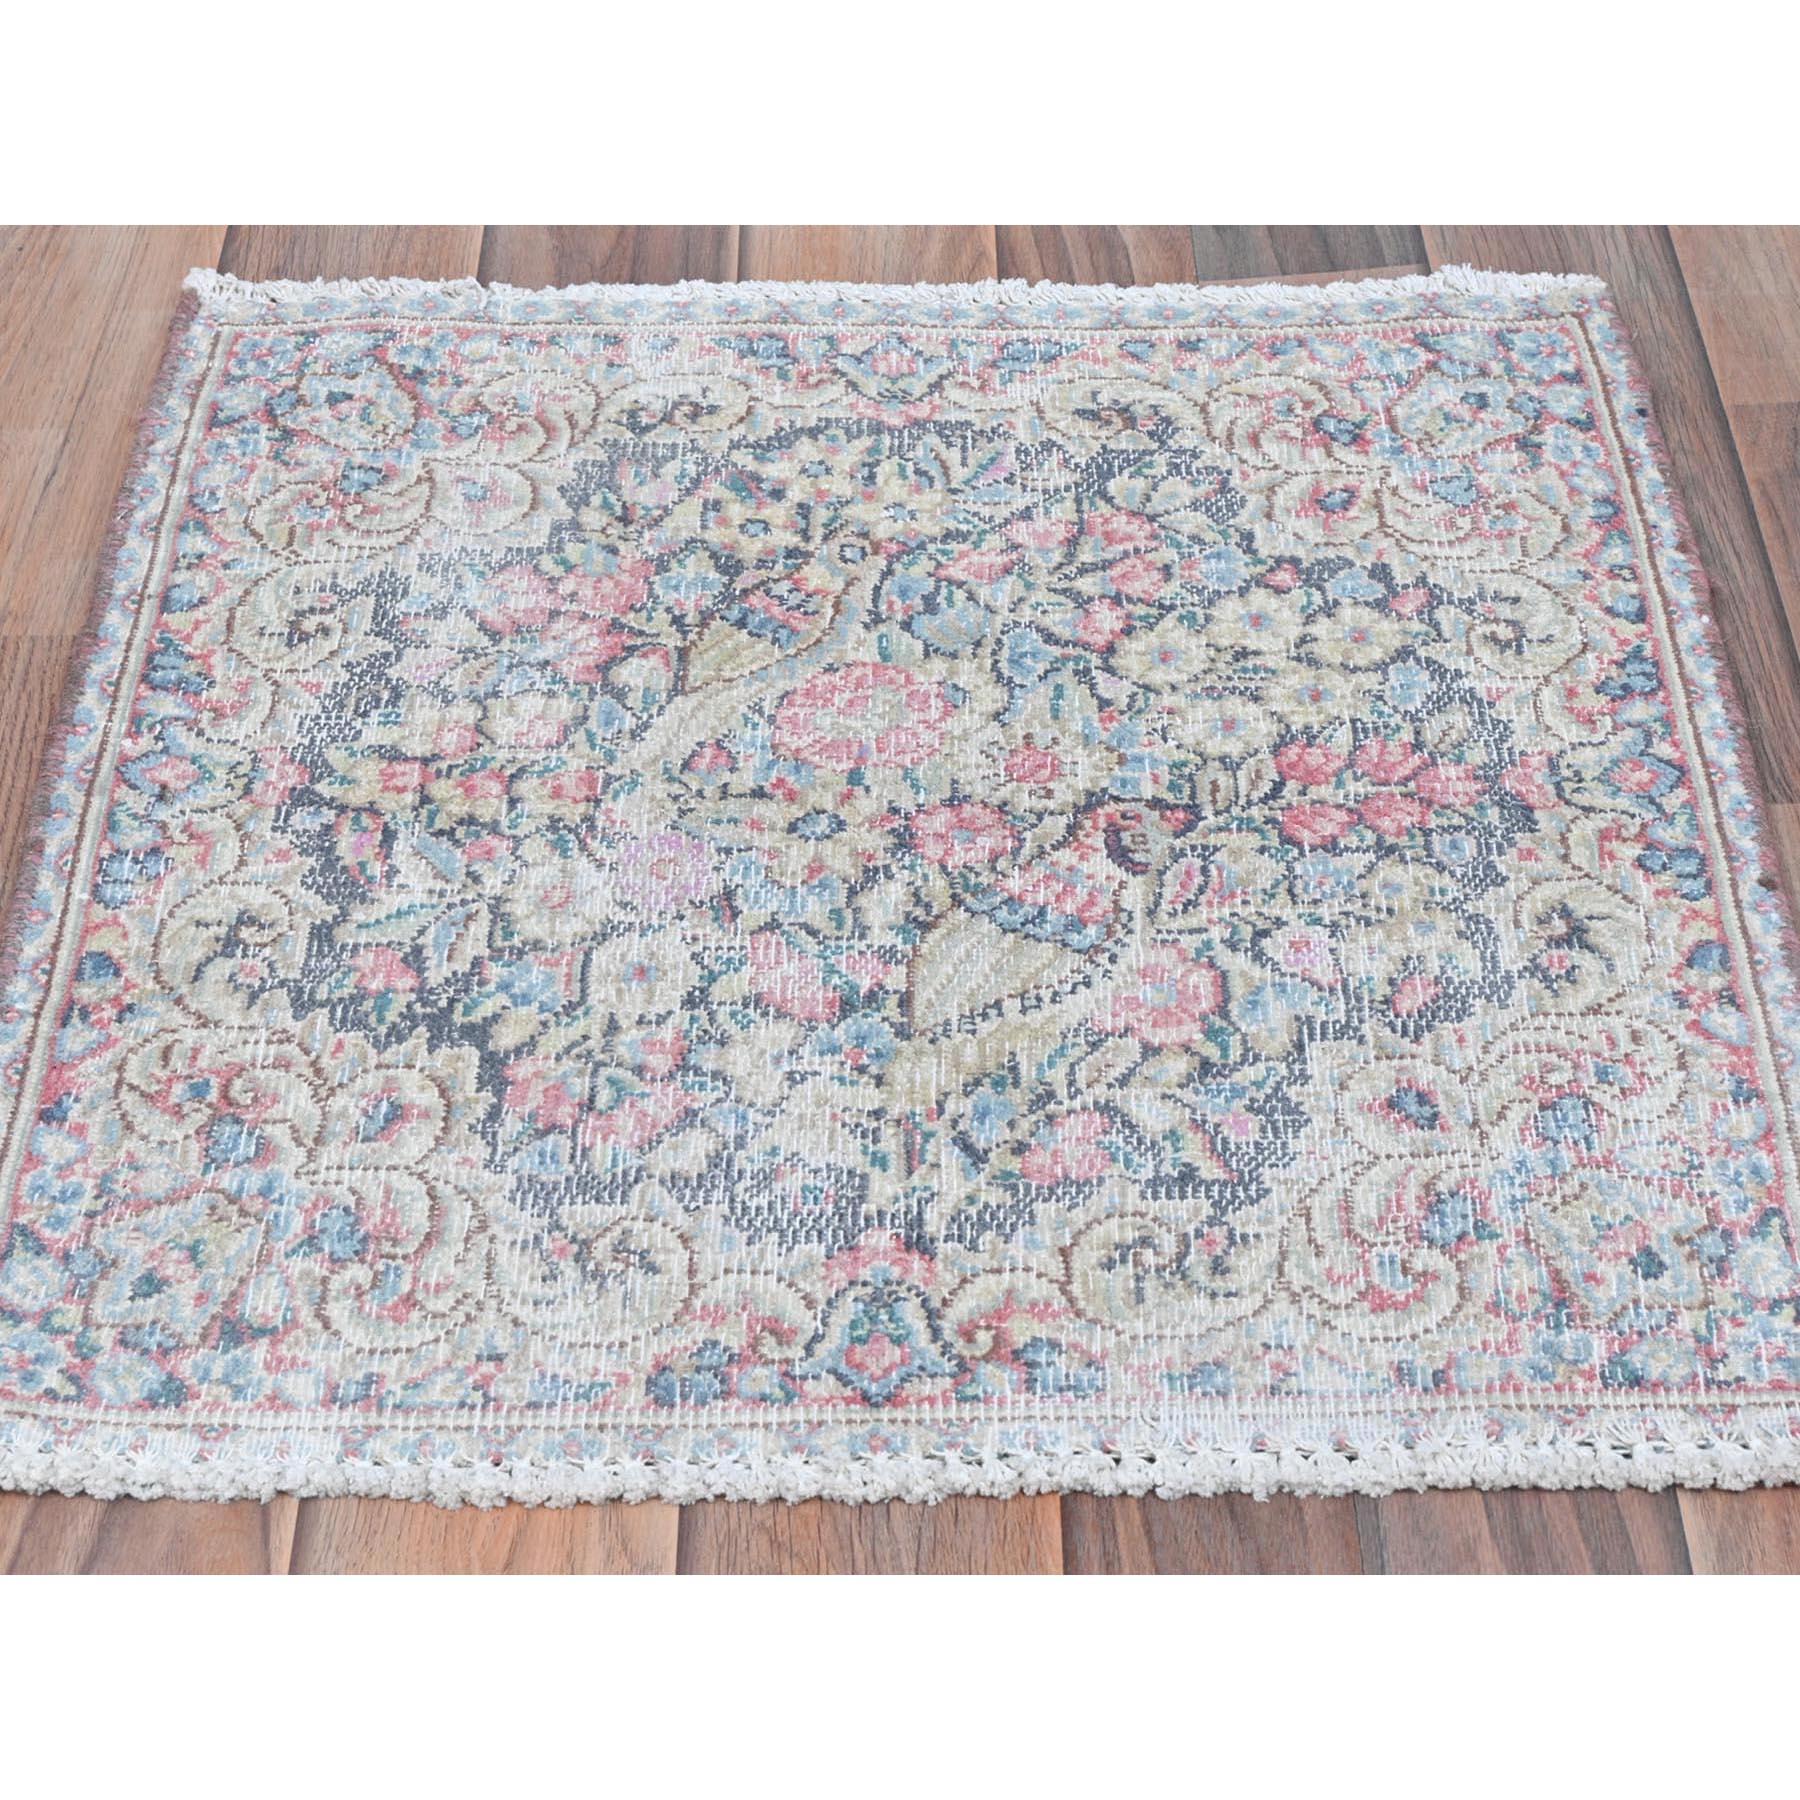 This fabulous Hand-Knotted carpet has been created and designed for extra strength and durability. This rug has been handcrafted for weeks in the traditional method that is used to make
Exact rug size in feet and inches : 1'9